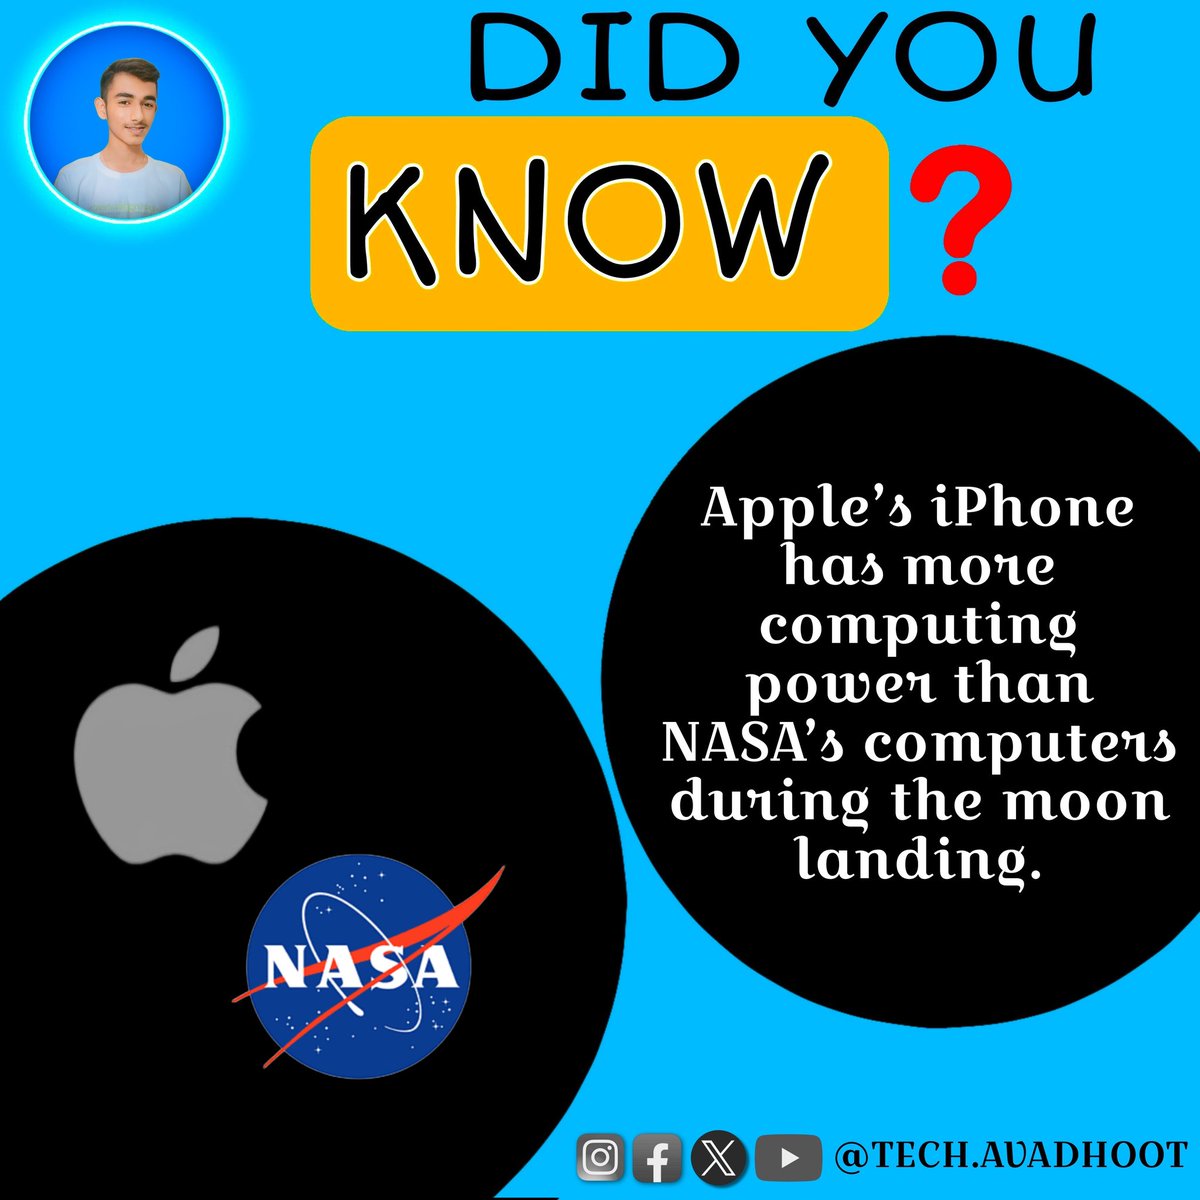 DID YOU KNOW? 🤔❓

Apple's iPhone has more computing power than NASA'S computers during moon landing.

Like and Follow 

#techfacts #technology #tech #technews #facts #technologynews #techno #techworld #techie #technologies  #techhacks #technews #techfactdaily #DidYouKnow